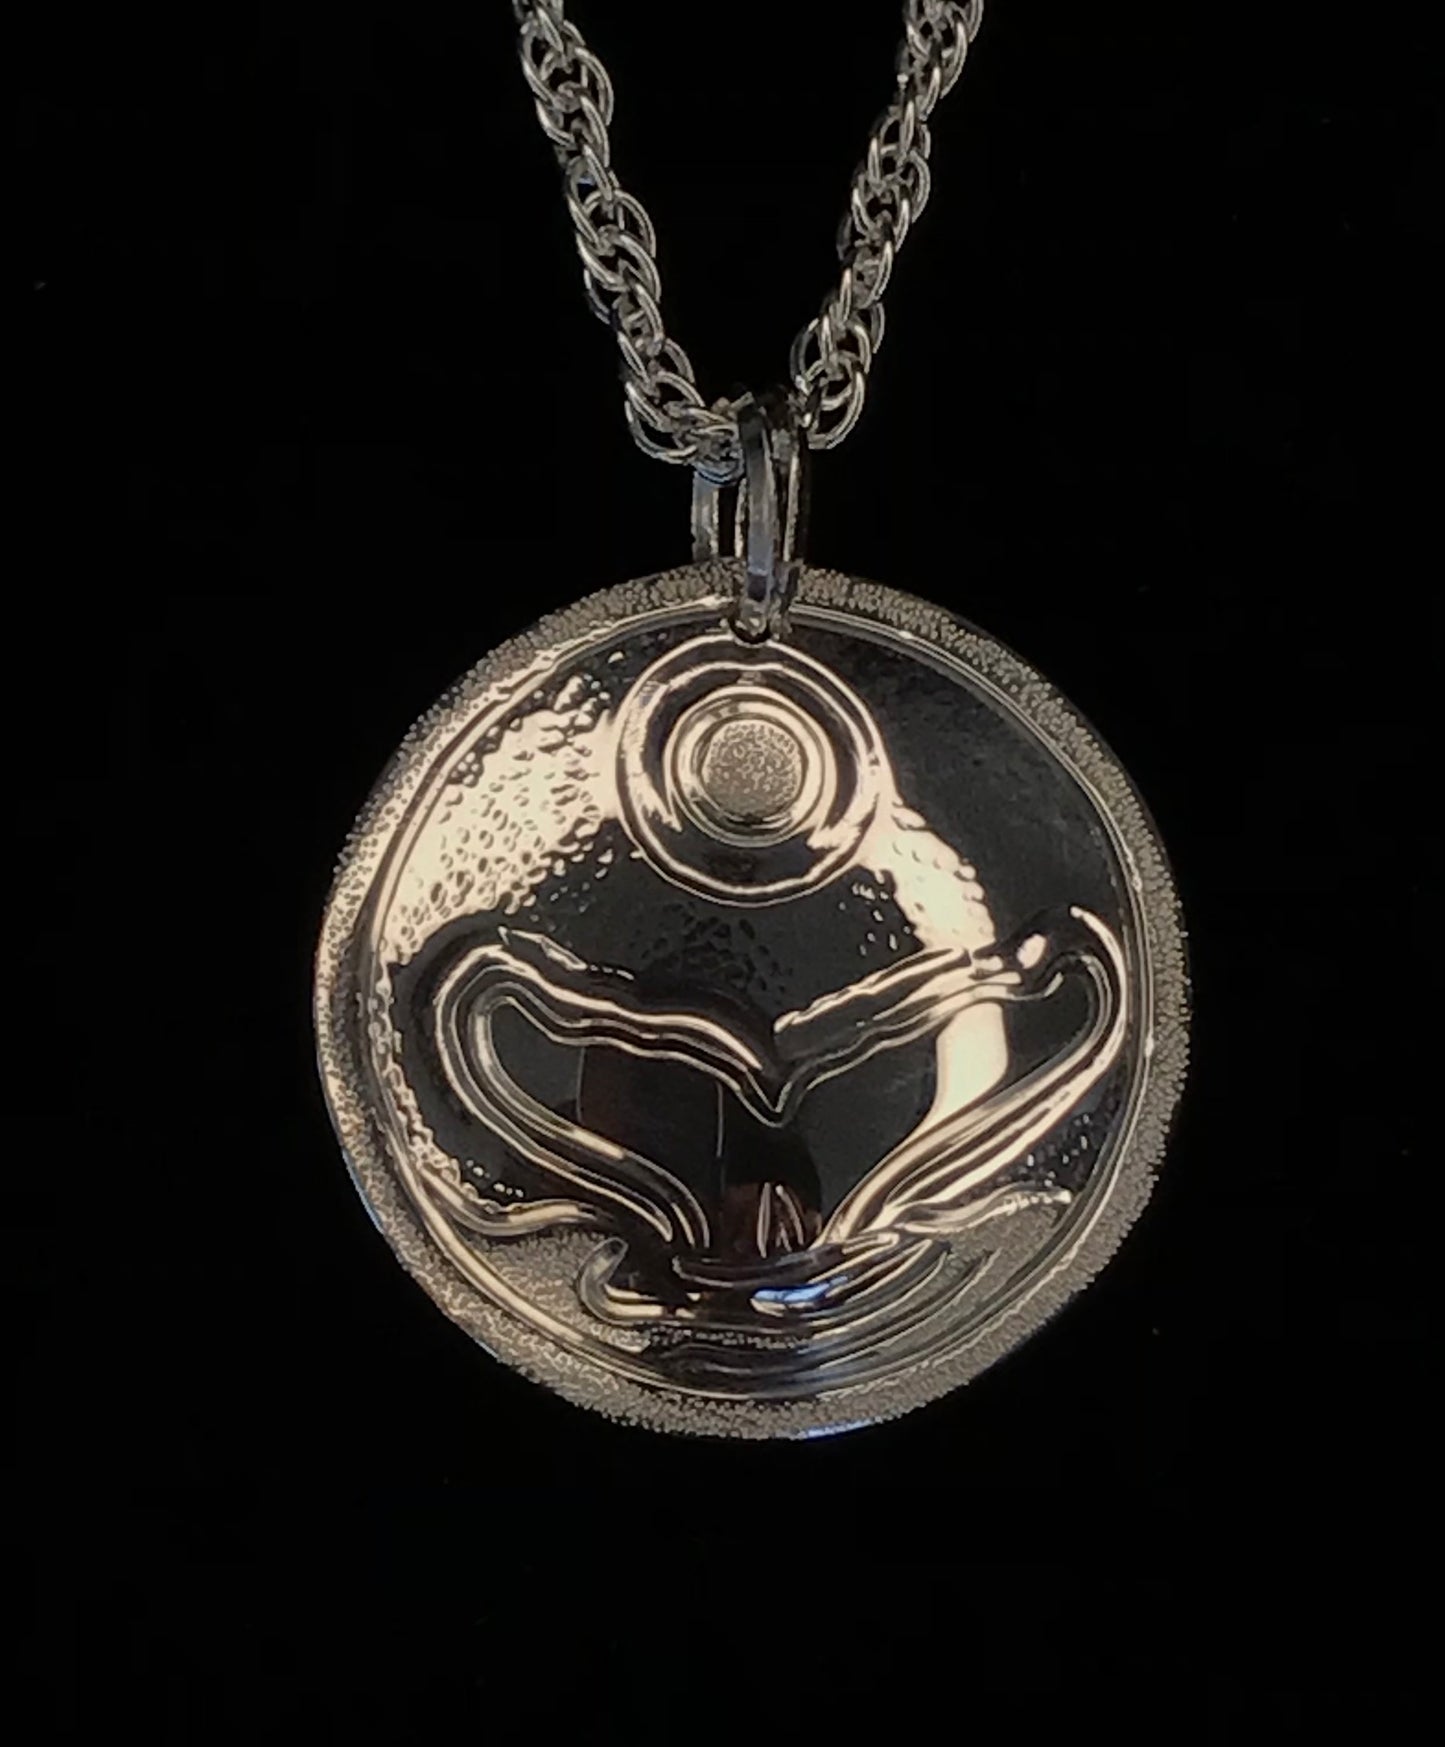 Whale Tail & Full Moon sterling silver pendant designed and engraved by Island artisan jeweller Laura Dutheil.